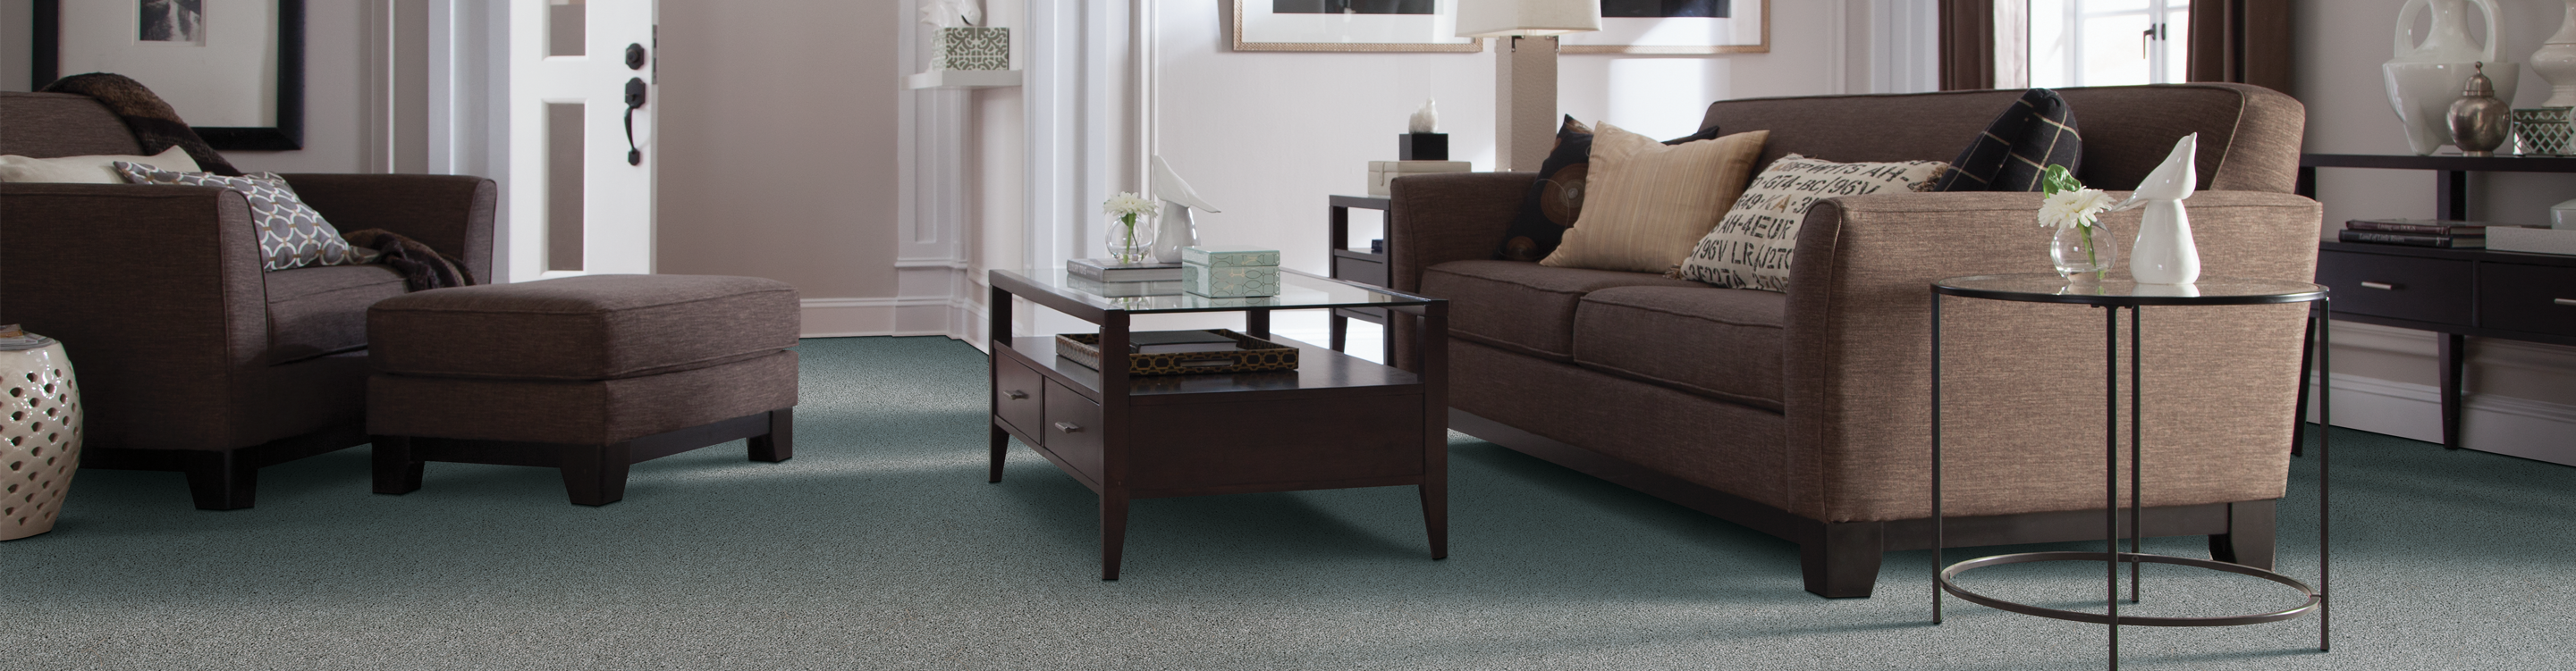 Greyish green carpet in living room with brown leather furnishings 